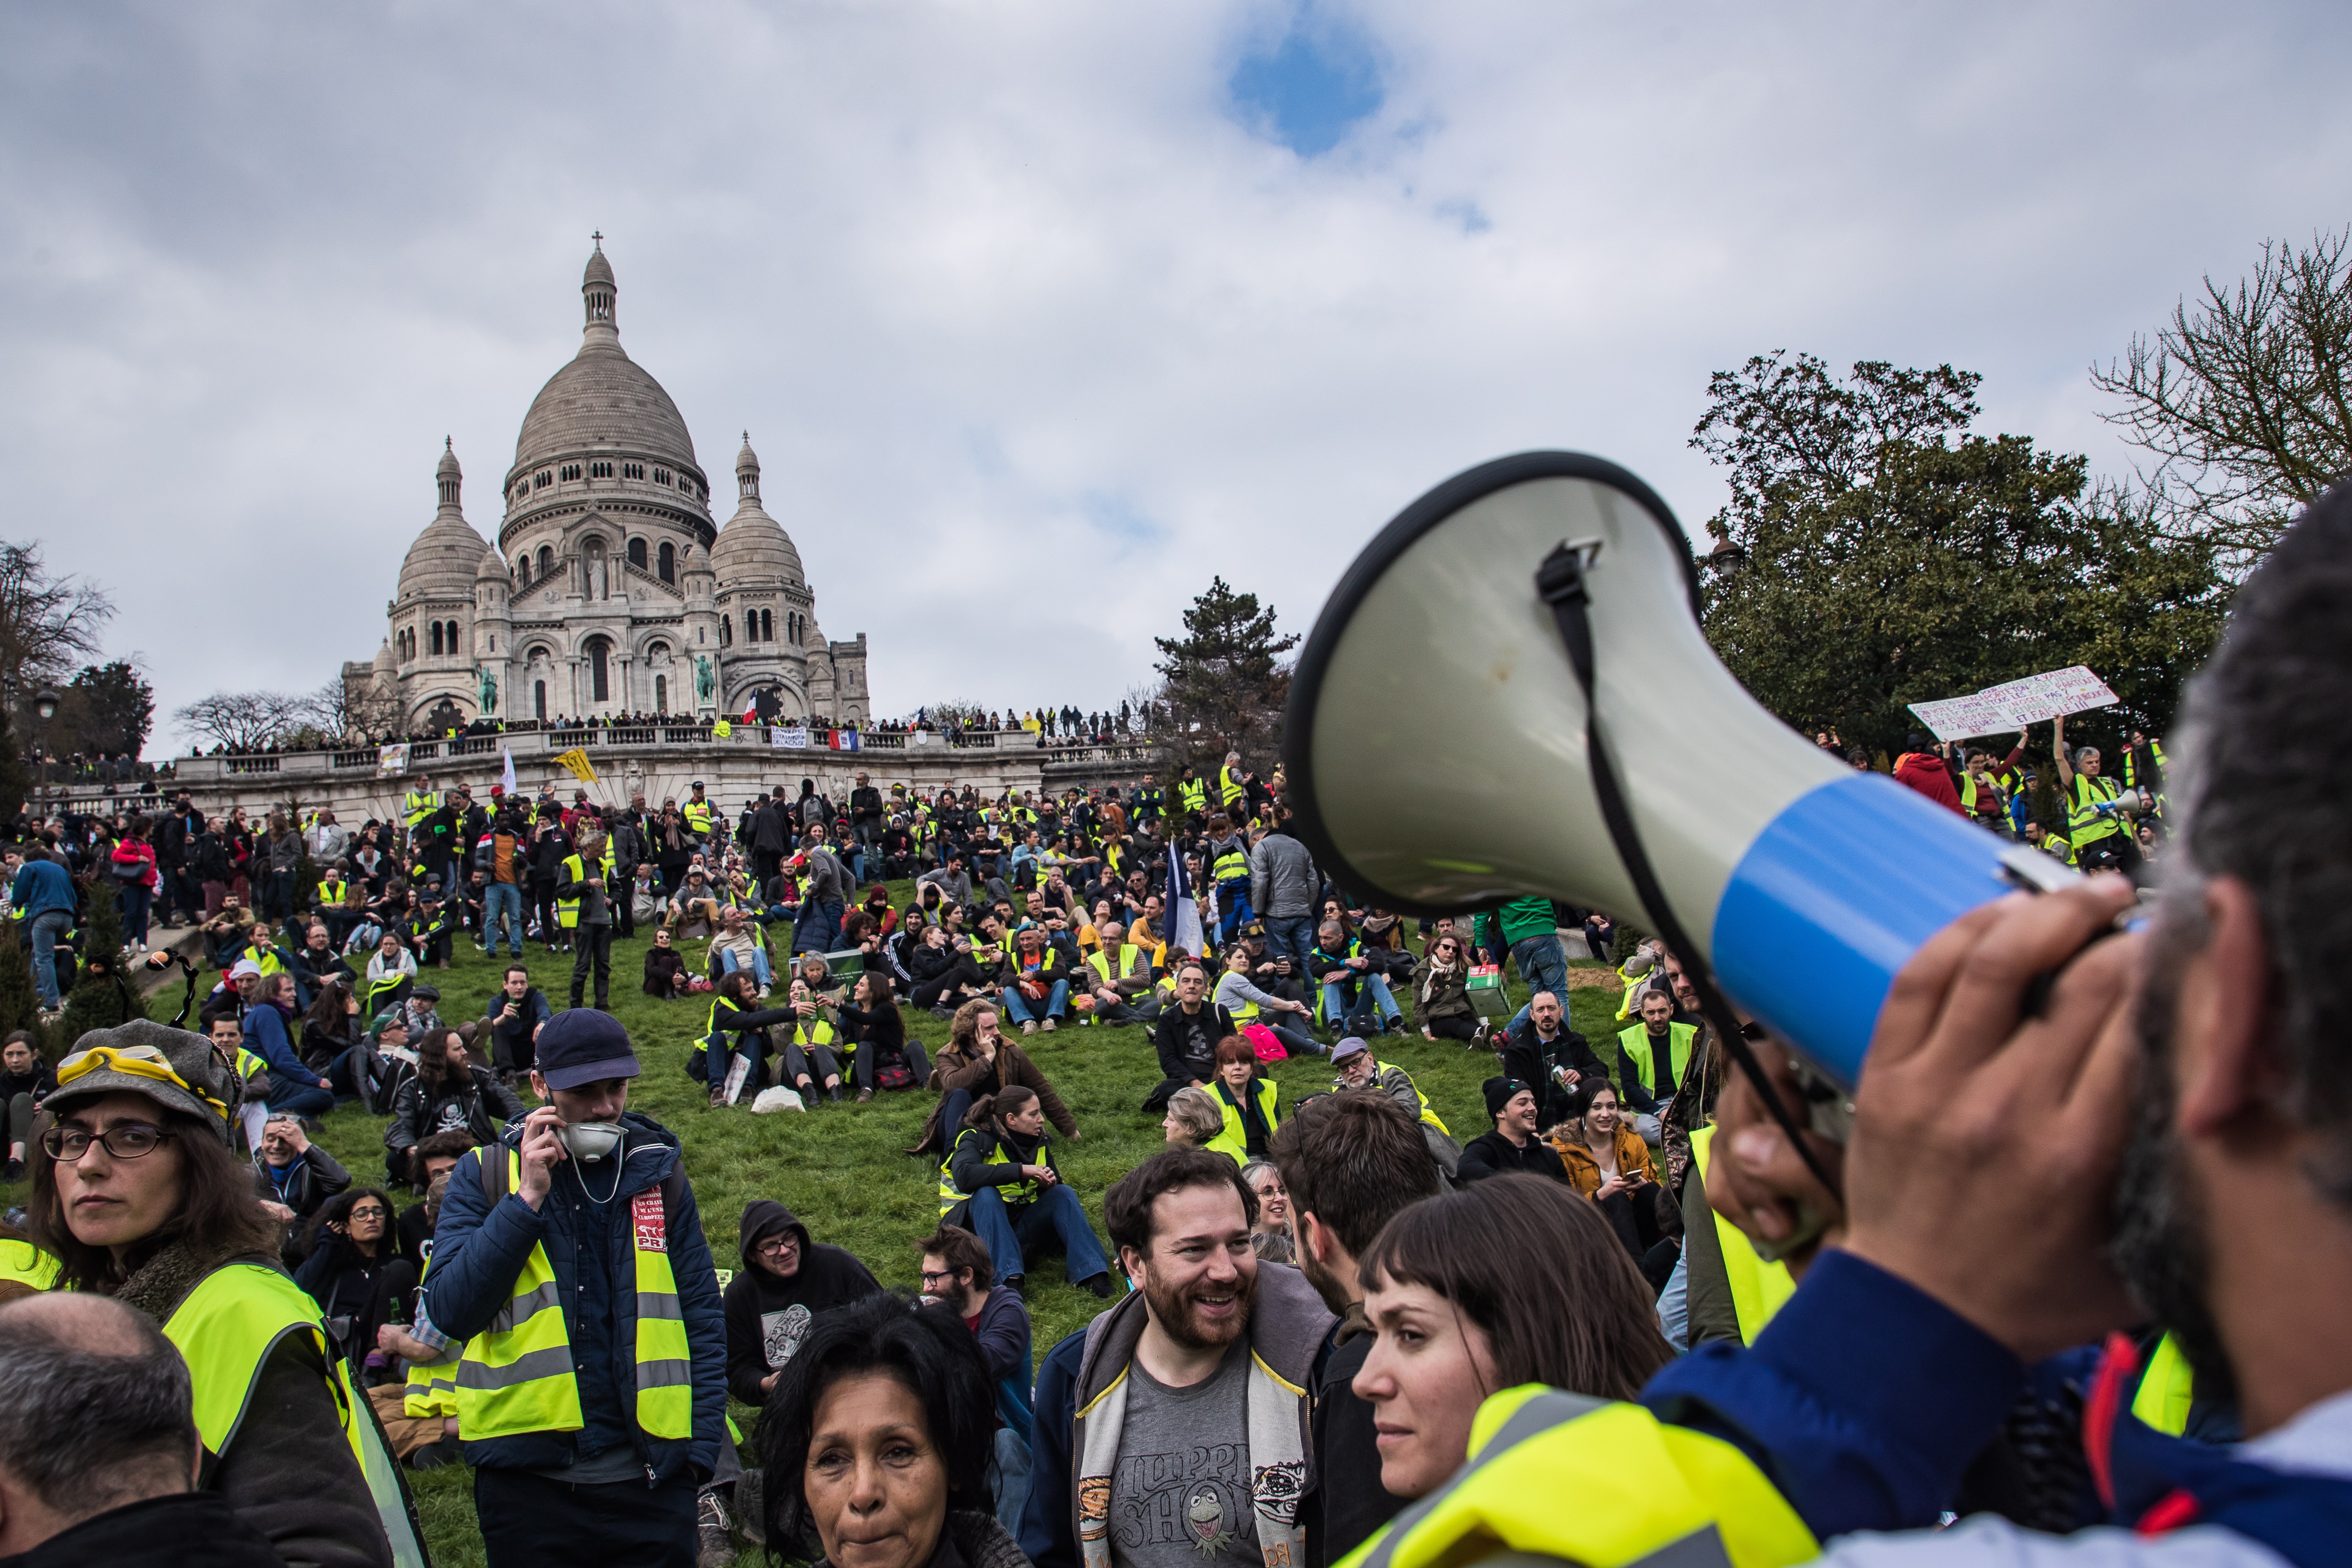 epa07458915 Protesters from the 'Gilets Jaunes' (Yellow Vests) gather in front of the Sacre-Coeur Basilica of Montmartre during the 'Act XIX' demonstration (the 19th consecutive national protest on a Saturday) in Paris, France, 23 March 2019. To prevent a repeat of the last week riots, French authorities have banned demonstrations in a large area in the west of Paris, including the Champs-Elysees. Yellow vest organizers called on social media for protests in different places in Paris, including the Trocadero square.  EPA/CHRISTOPHE PETIT TESSON